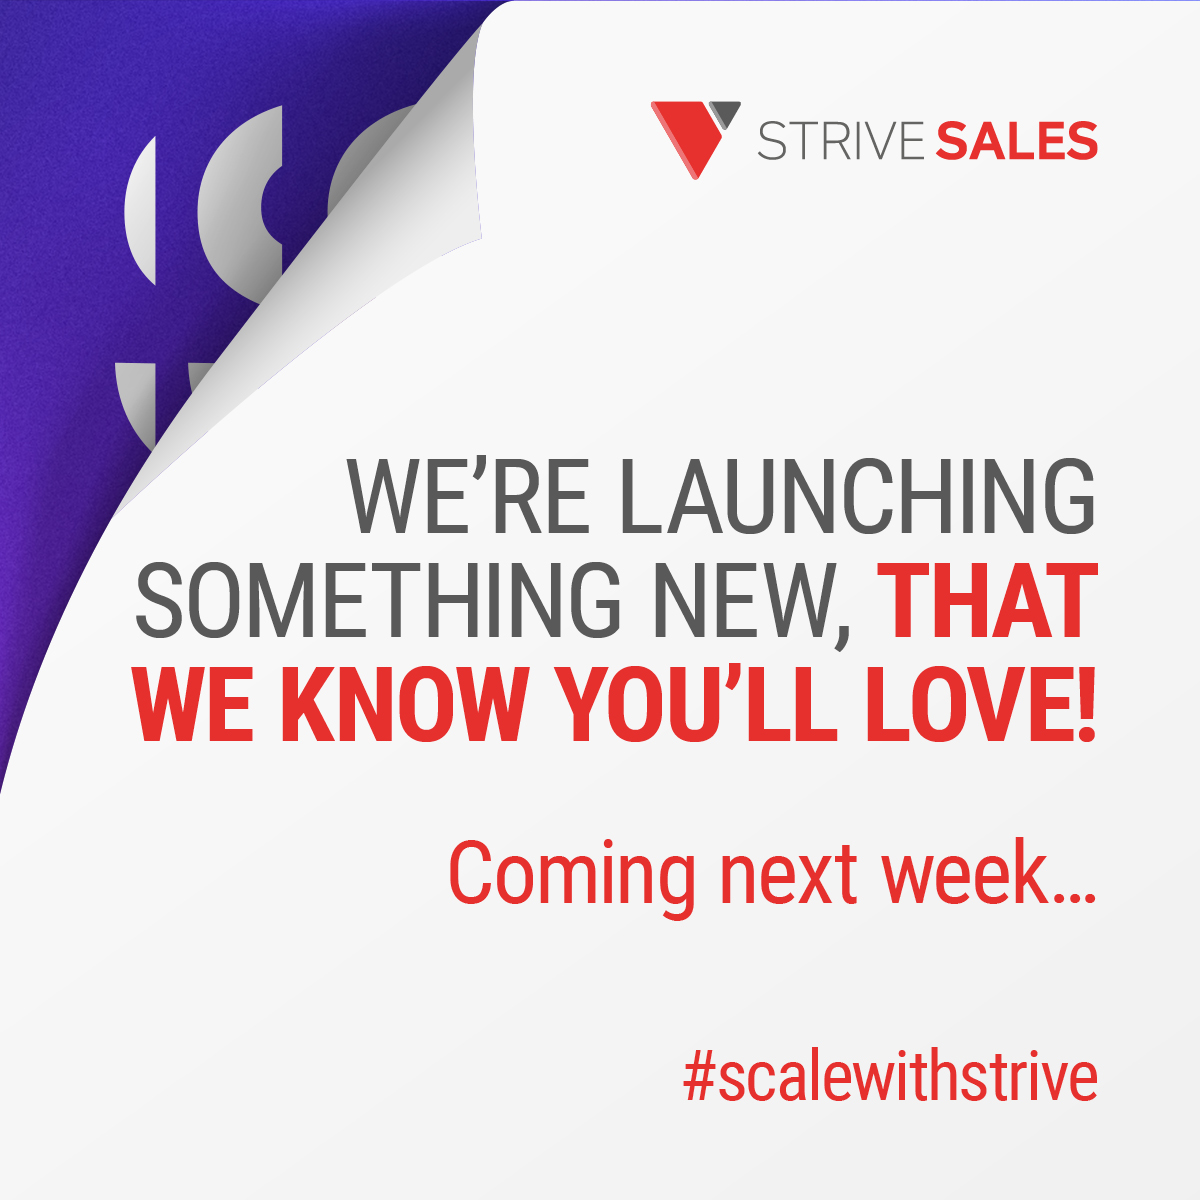 Coming next week - stay tuned 🥳

#scalewithstrive #saassales #companyannouncement